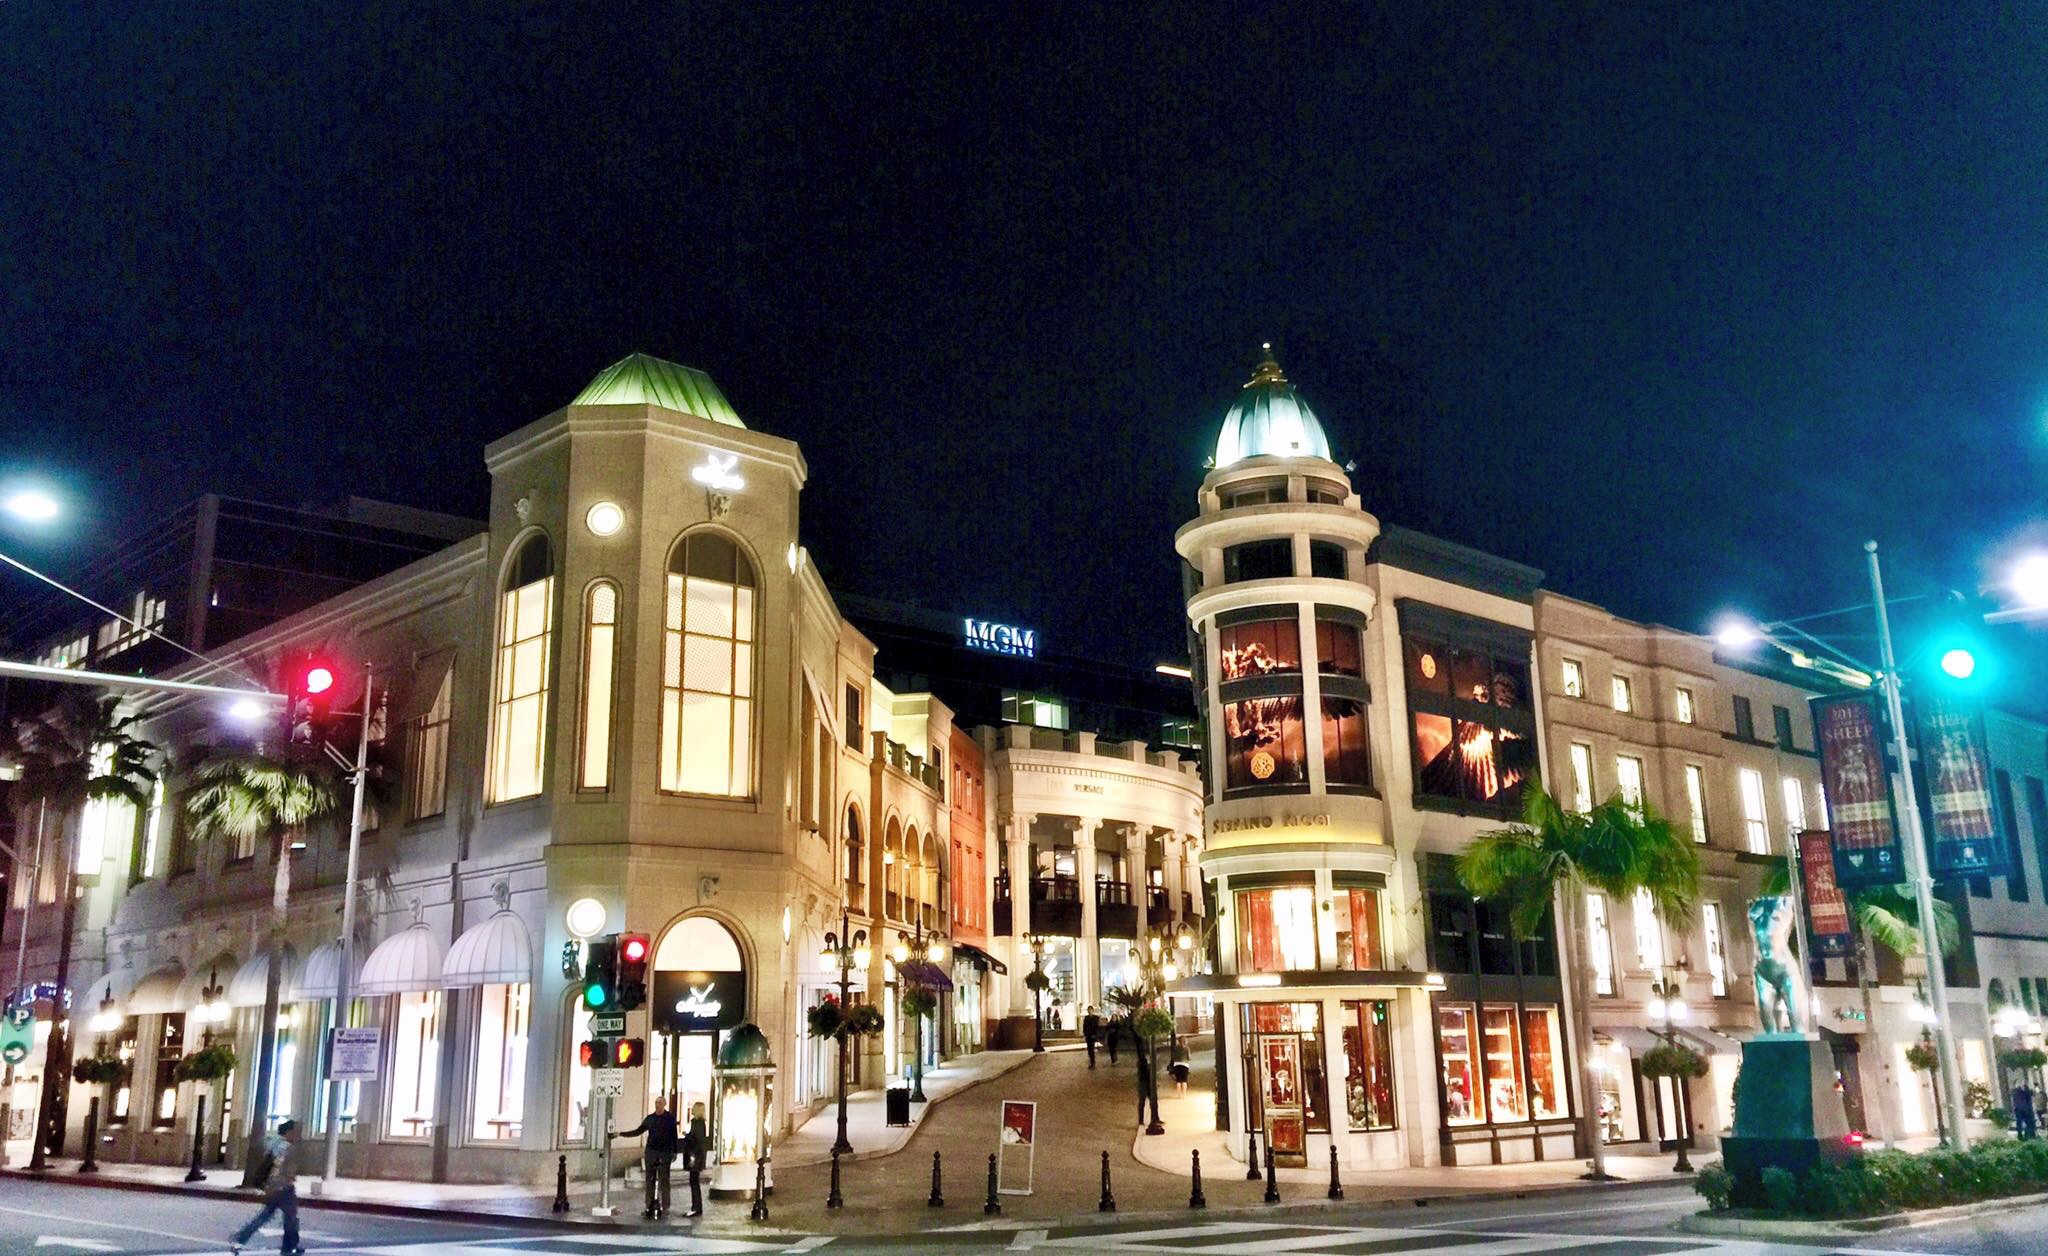 The beautiful architecture at Two Rodeo Drive on Rodeo Drive in